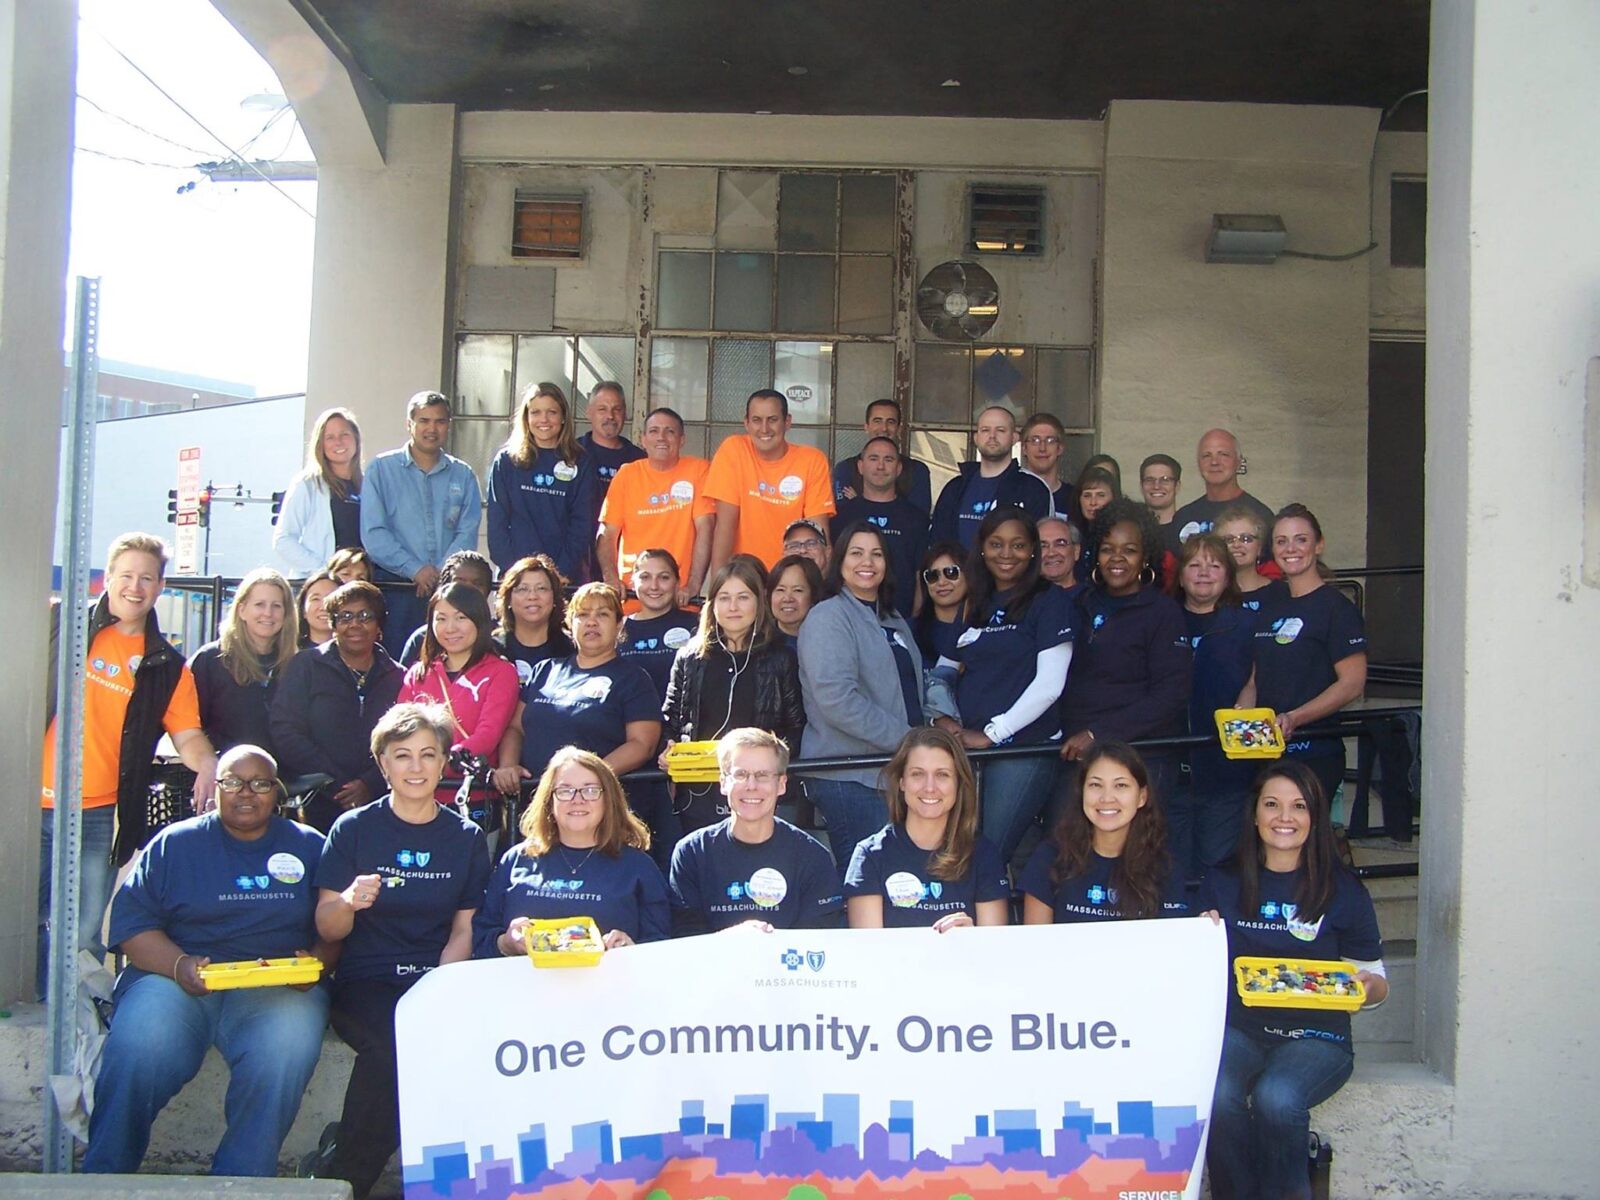 A large group of 34 corporate volunteers are smiling at the camera. They are wearing blue colored shirts which show the logo of Blue Cross Blue Shield of Massachusetts. 5 volunteers in the front are holding a large sign which states: “One Community. One Blue,” and shows the blue cross blue shield logo with a silhouette of the city.